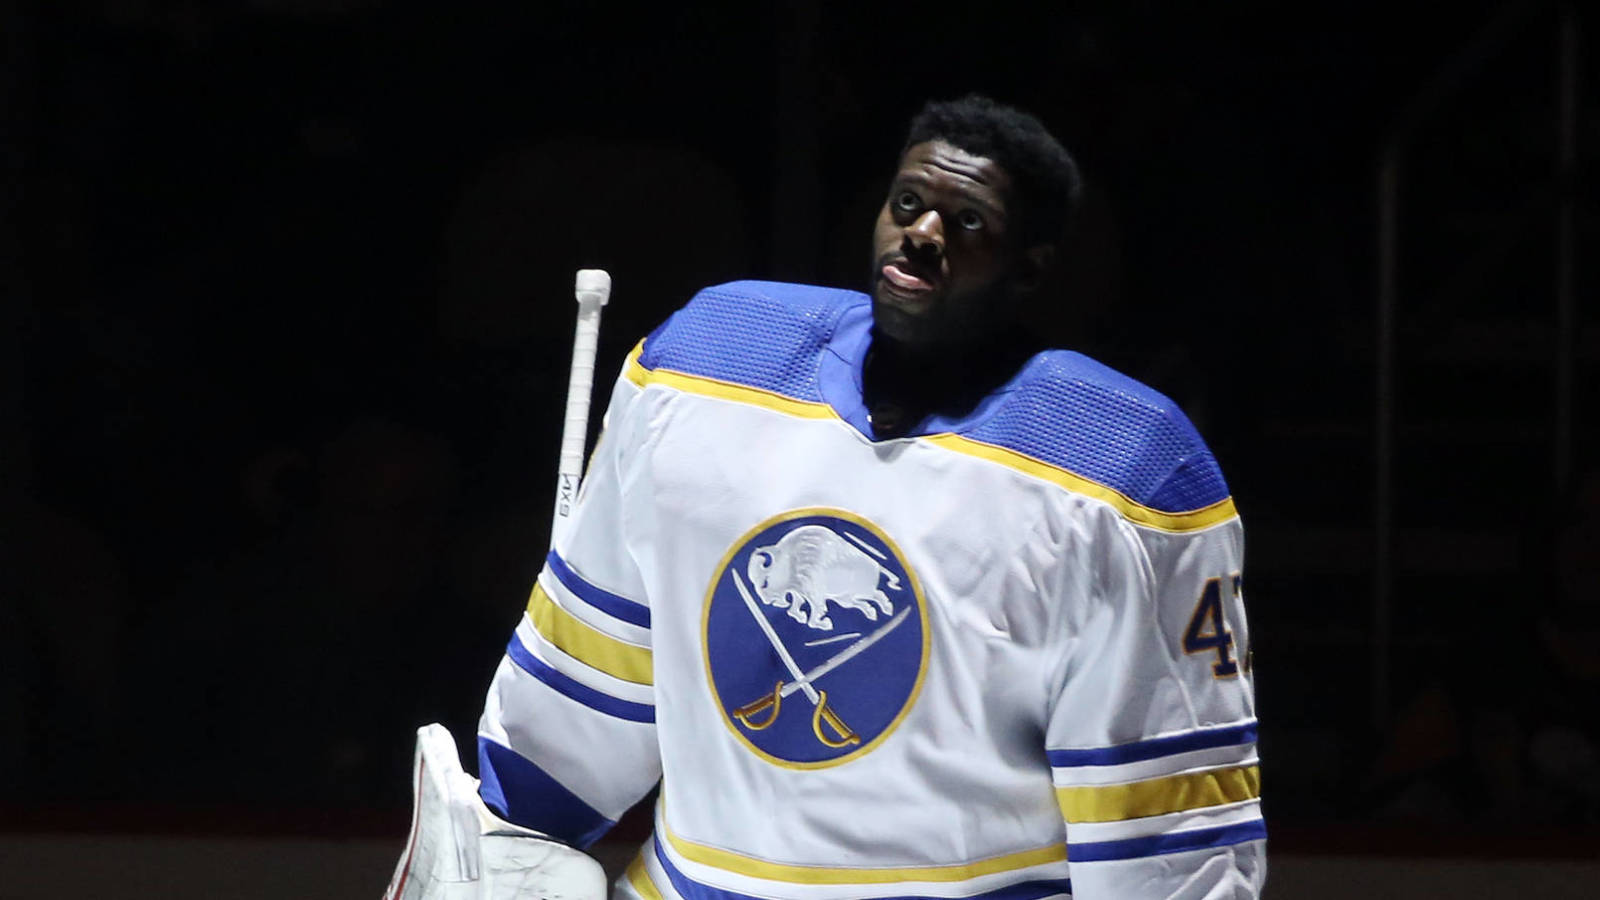 Malcom Subban live-tweeting his brother's overturned goal sums up